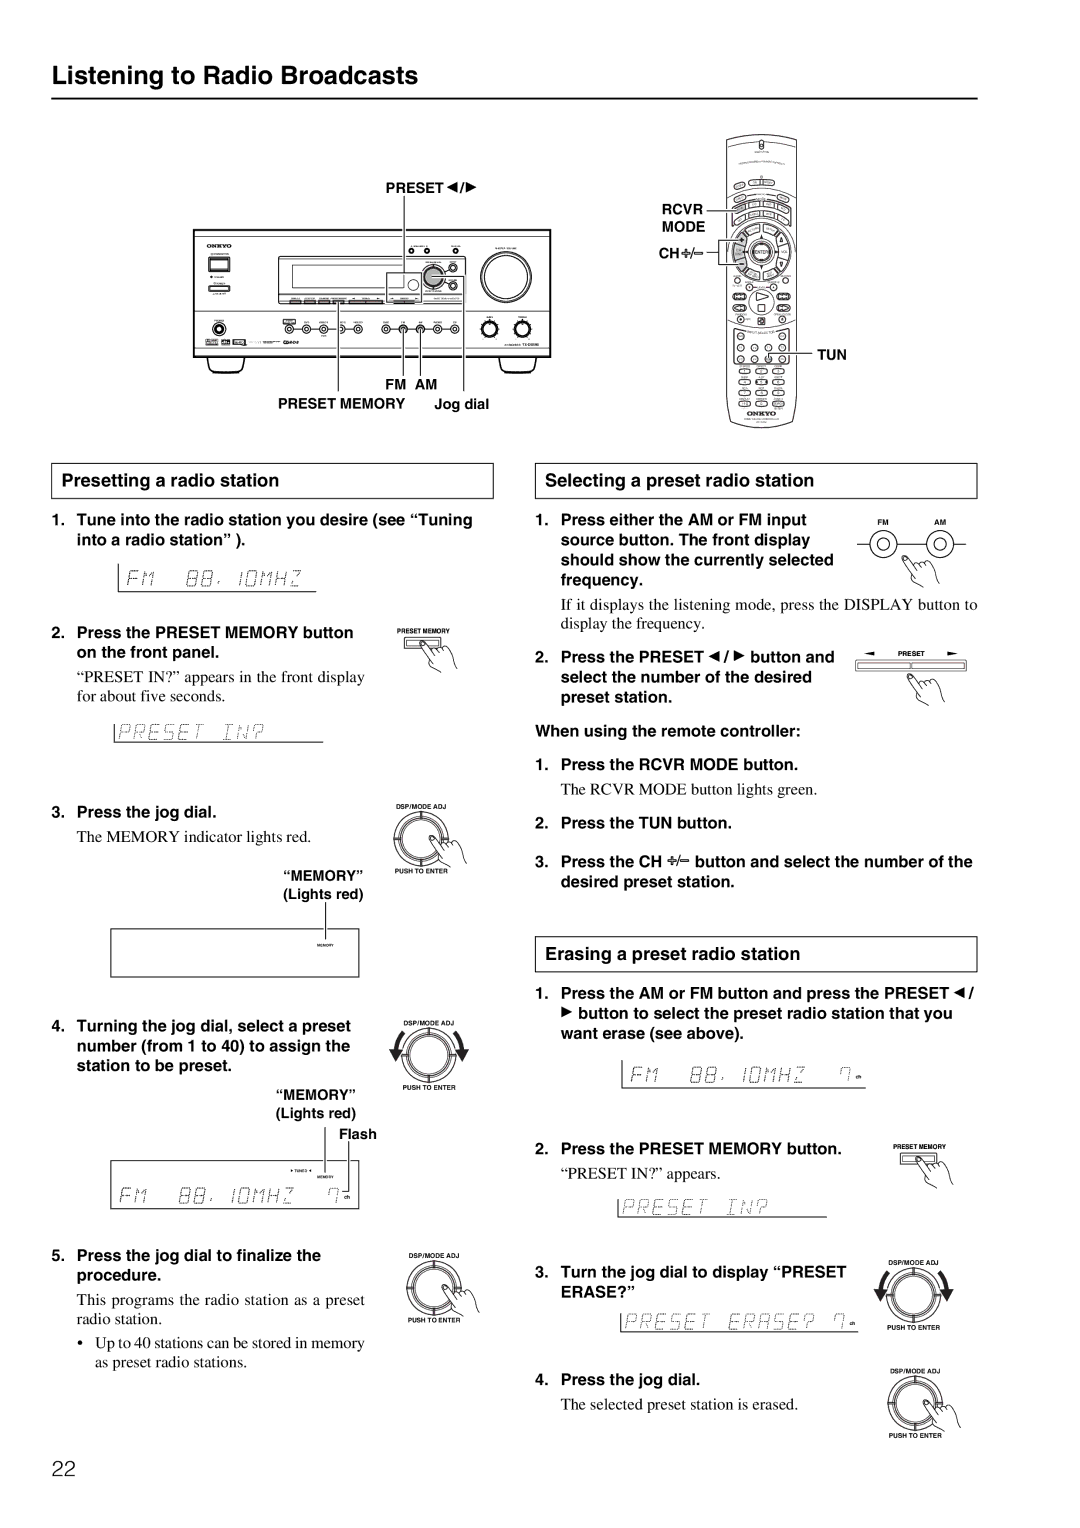 Onkyo TX-DS595 appendix Listening to Radio Broadcasts, Presetting a radio station Selecting a preset radio station 